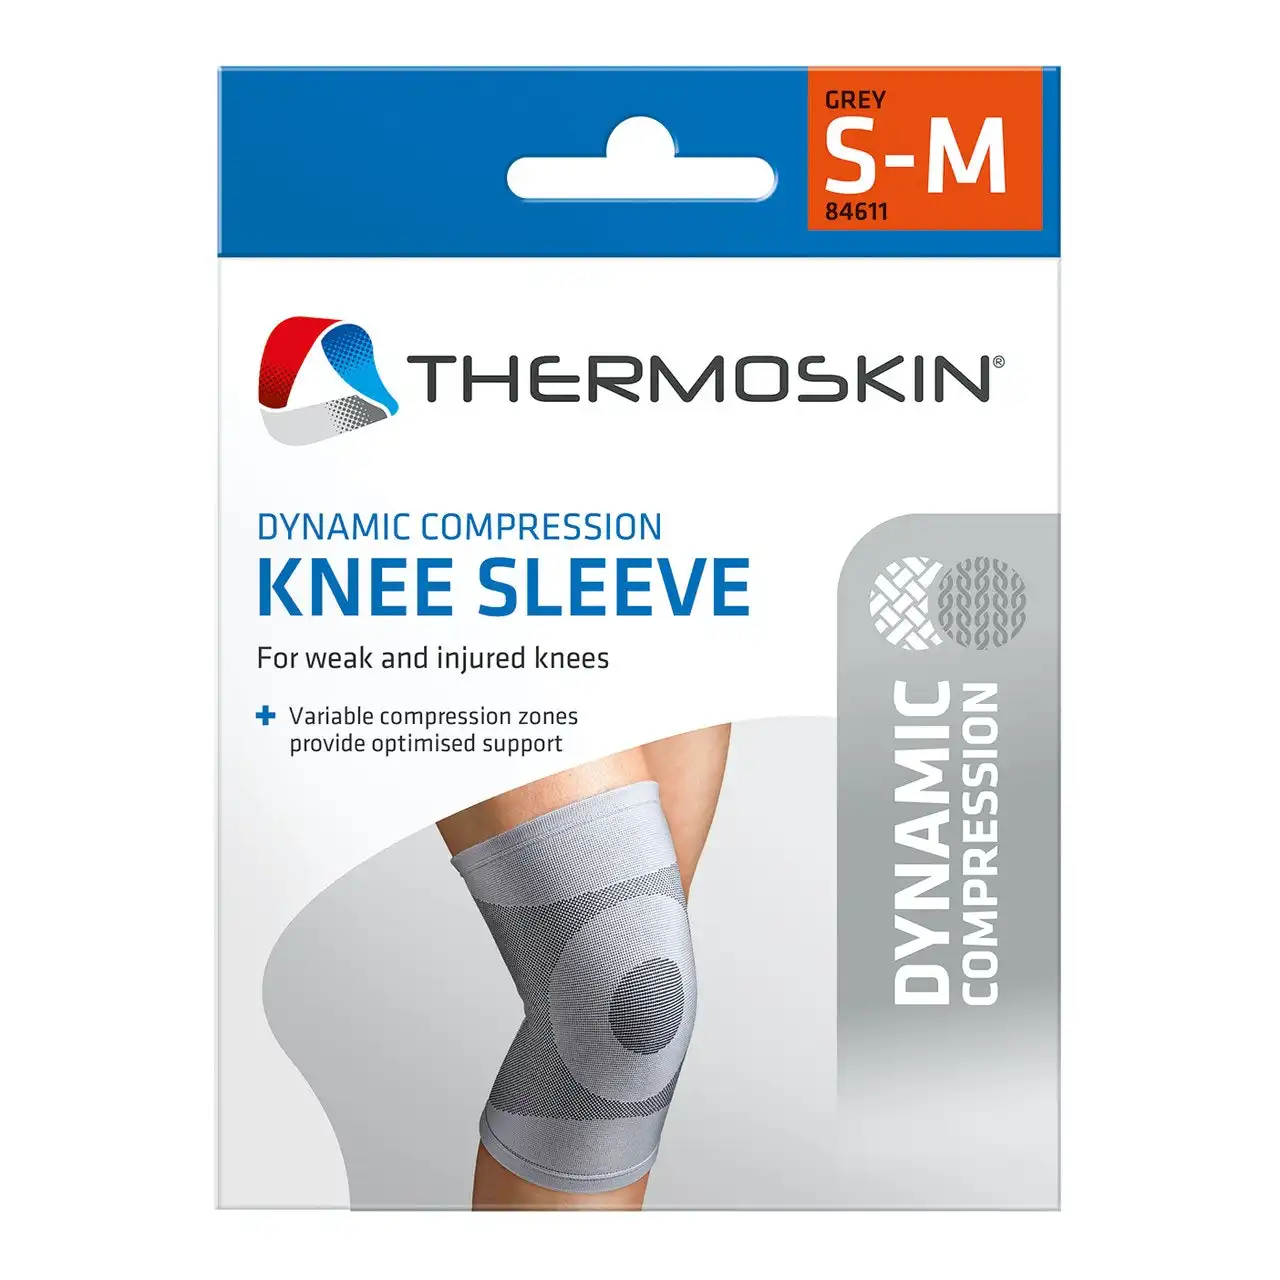 Thermoskin Dynamic Compression Grey Knee Sleeve